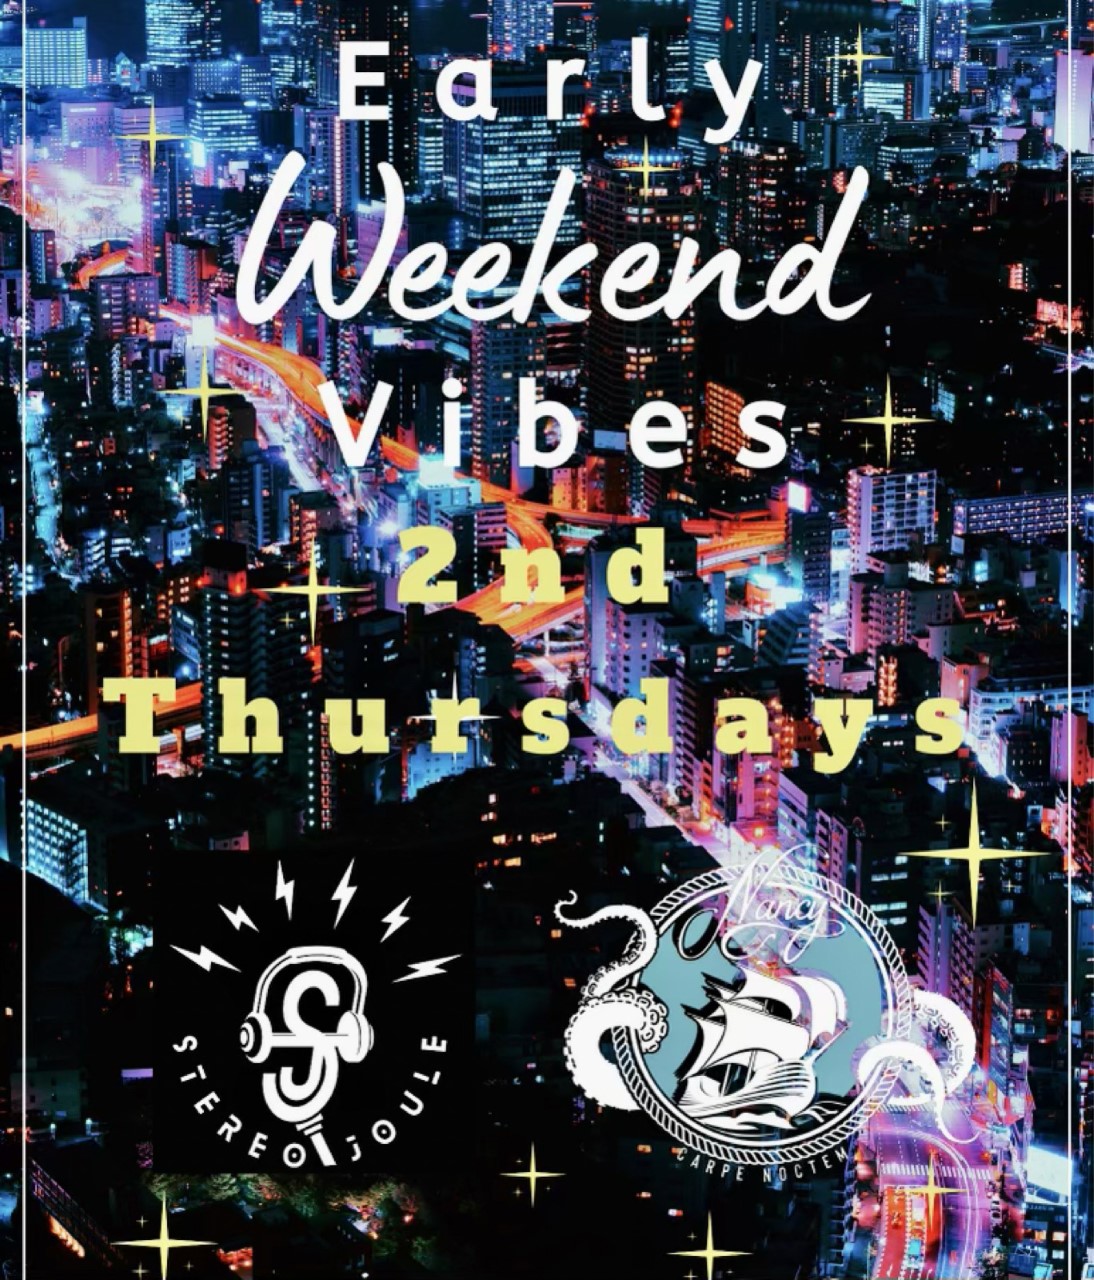 Early Weekend Vibes. 2nd Thursdays with Stereo Joule at Bar Nancy